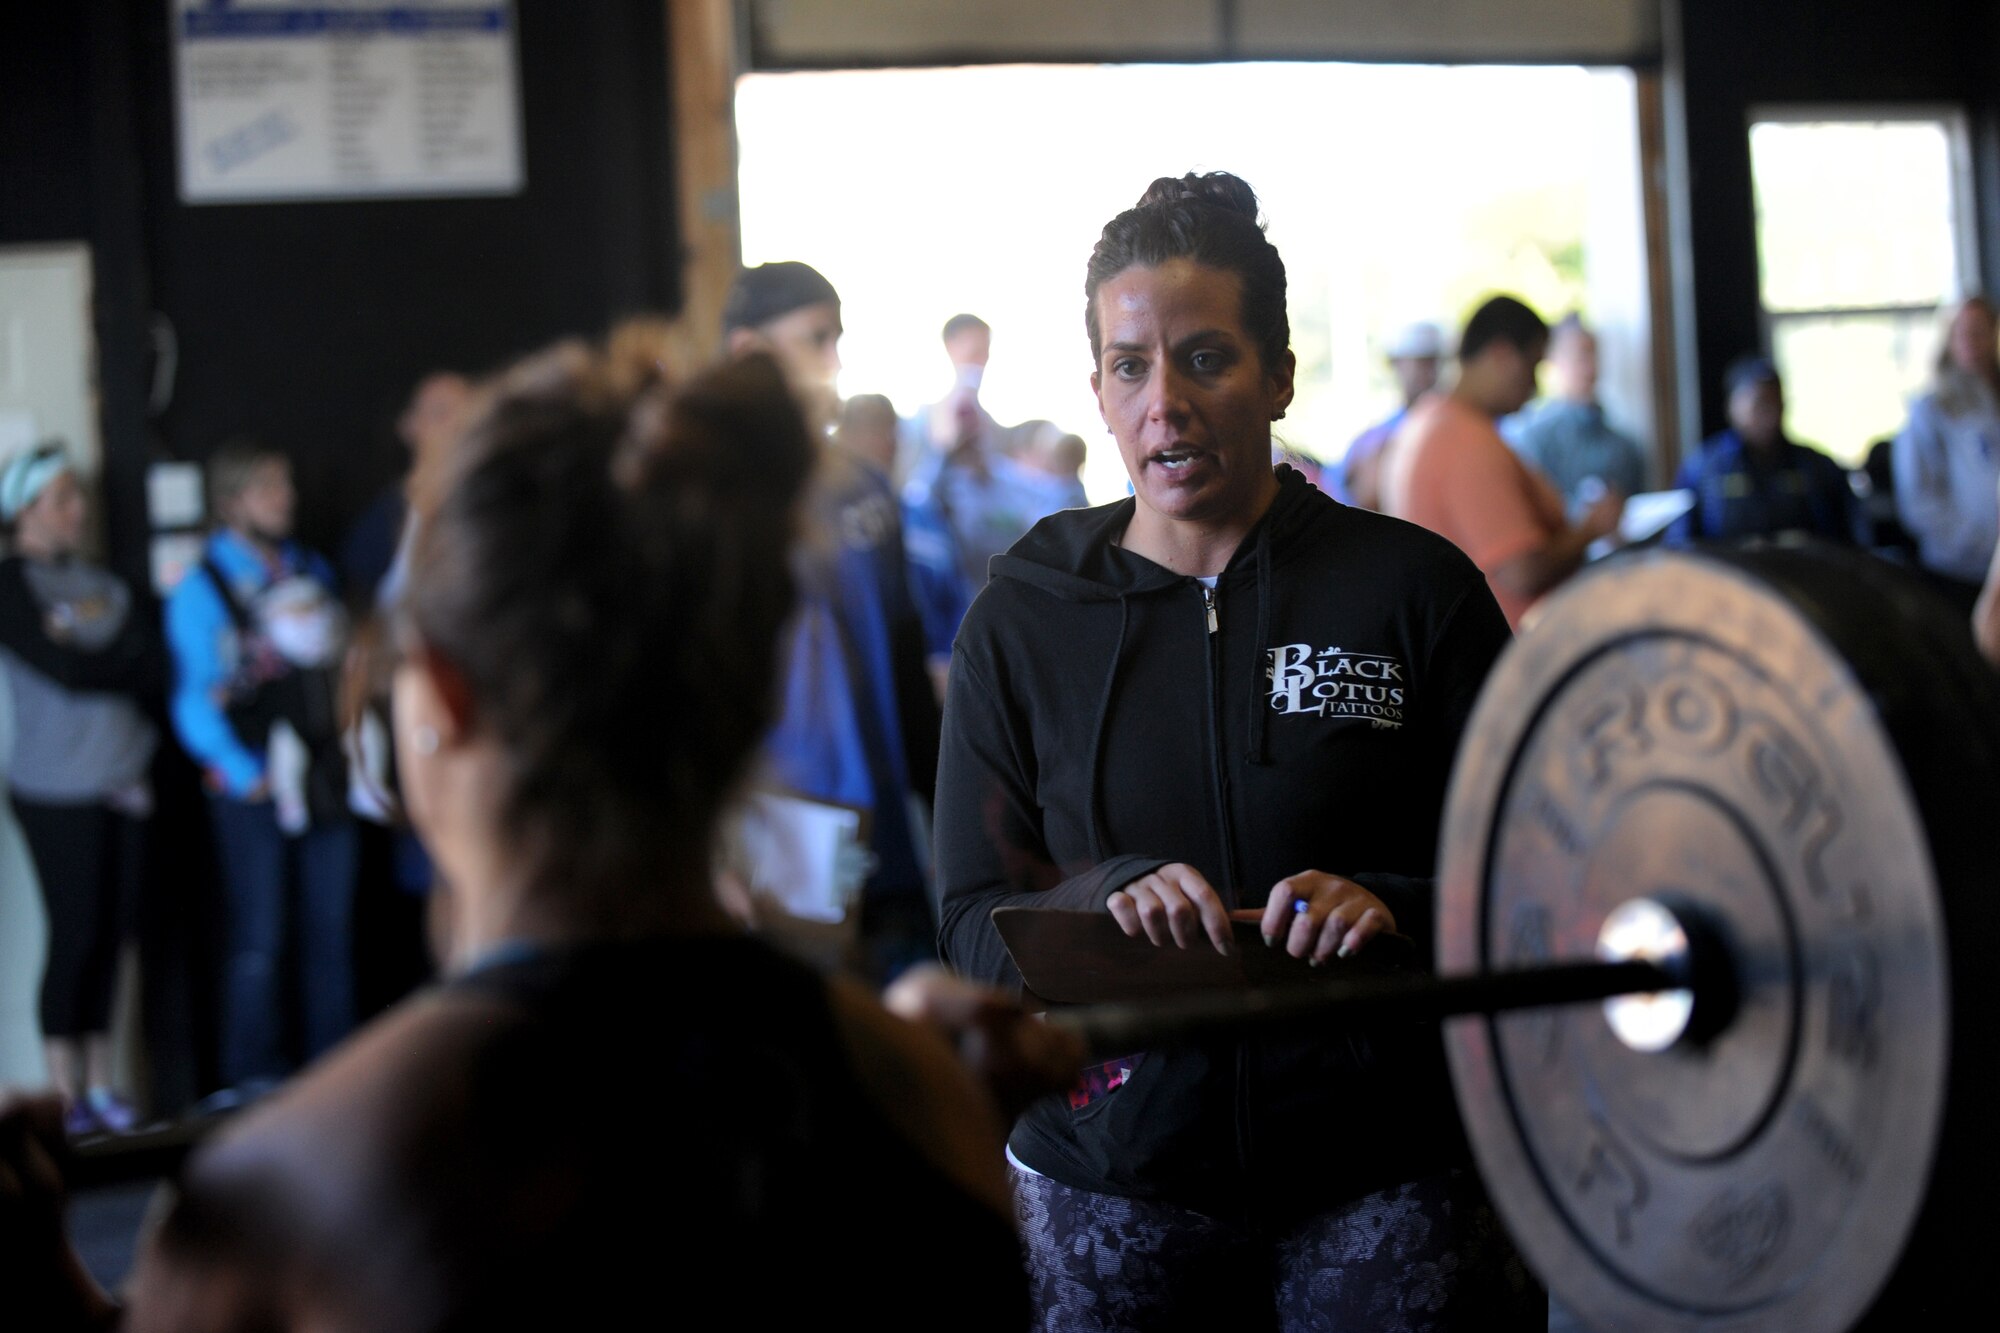 Staff Sgt. Nicole Dudley, 436th Logistics Readiness Squadron unit deployment manager, watches as a competitor of the Eastern Shore Affiliate Challenge performs an exercise Oct. 17, 2015, in Georgetown, Del. Dudley, who also trains at a CrossFit gym, recently became certified to judge and volunteered her time to the event. (U.S. Air Force photo/Staff Sgt. Elizabeth Morris)